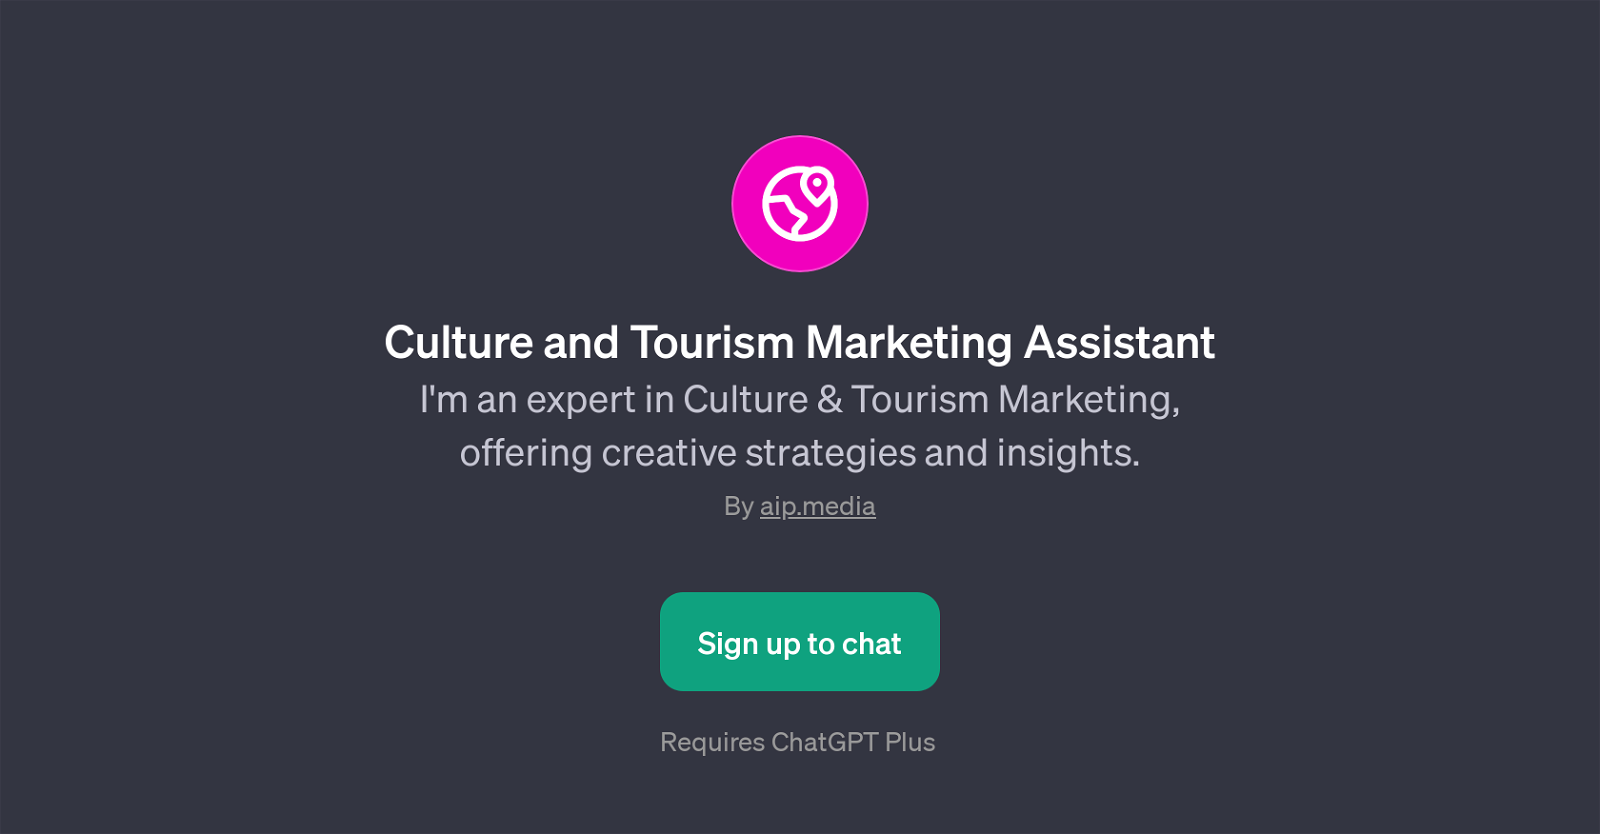 Culture and Tourism Marketing Assistant website